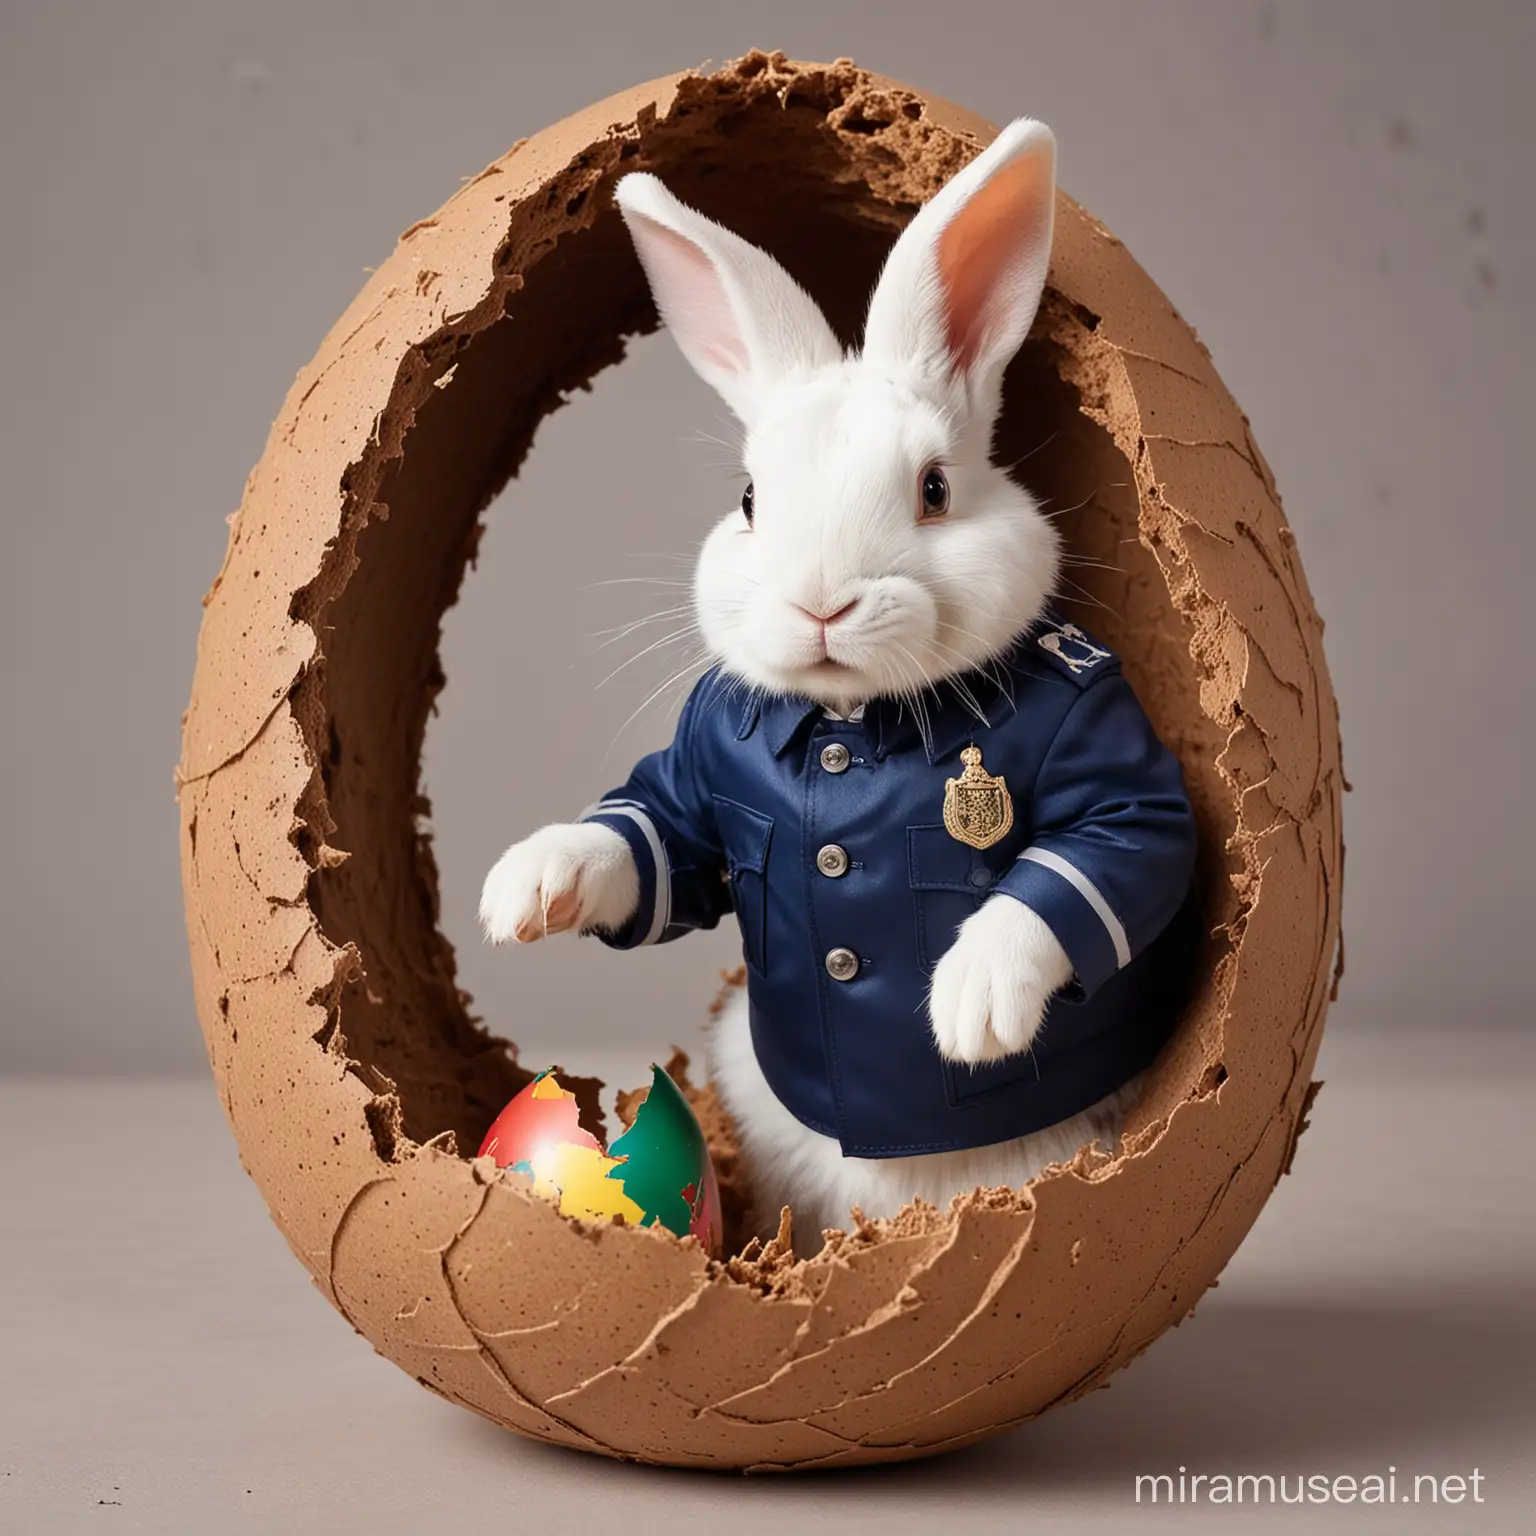 Rabbit dressed in security uniform. Breaking a hole into an easter egg